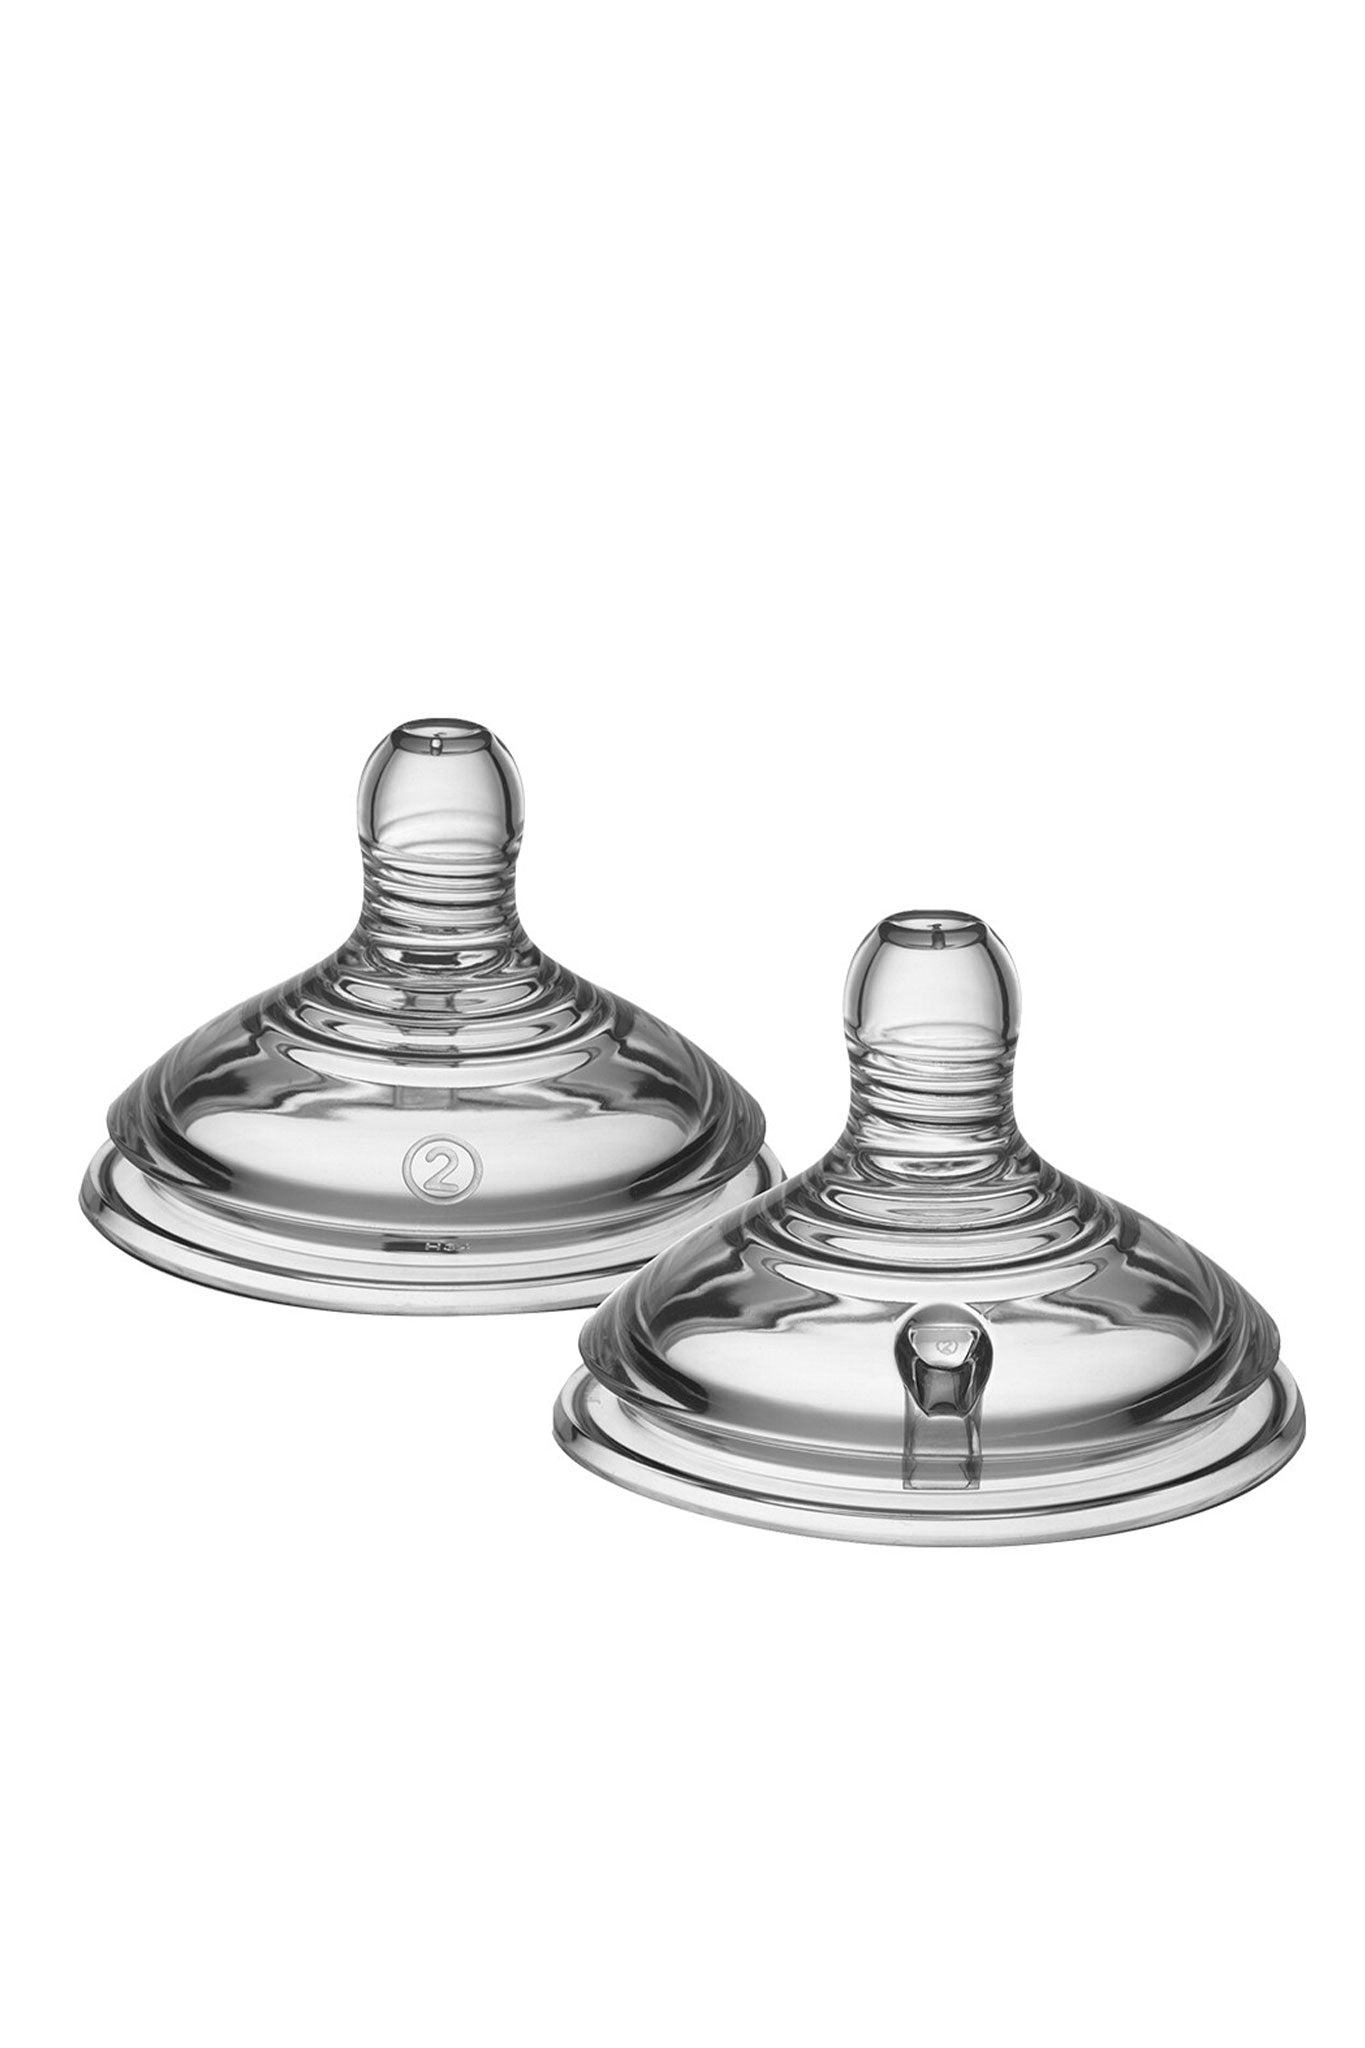 Buy Tommee Tippee Closer to Nature Medium Flow Teats (2-Pack) Online at Low  Prices in India 